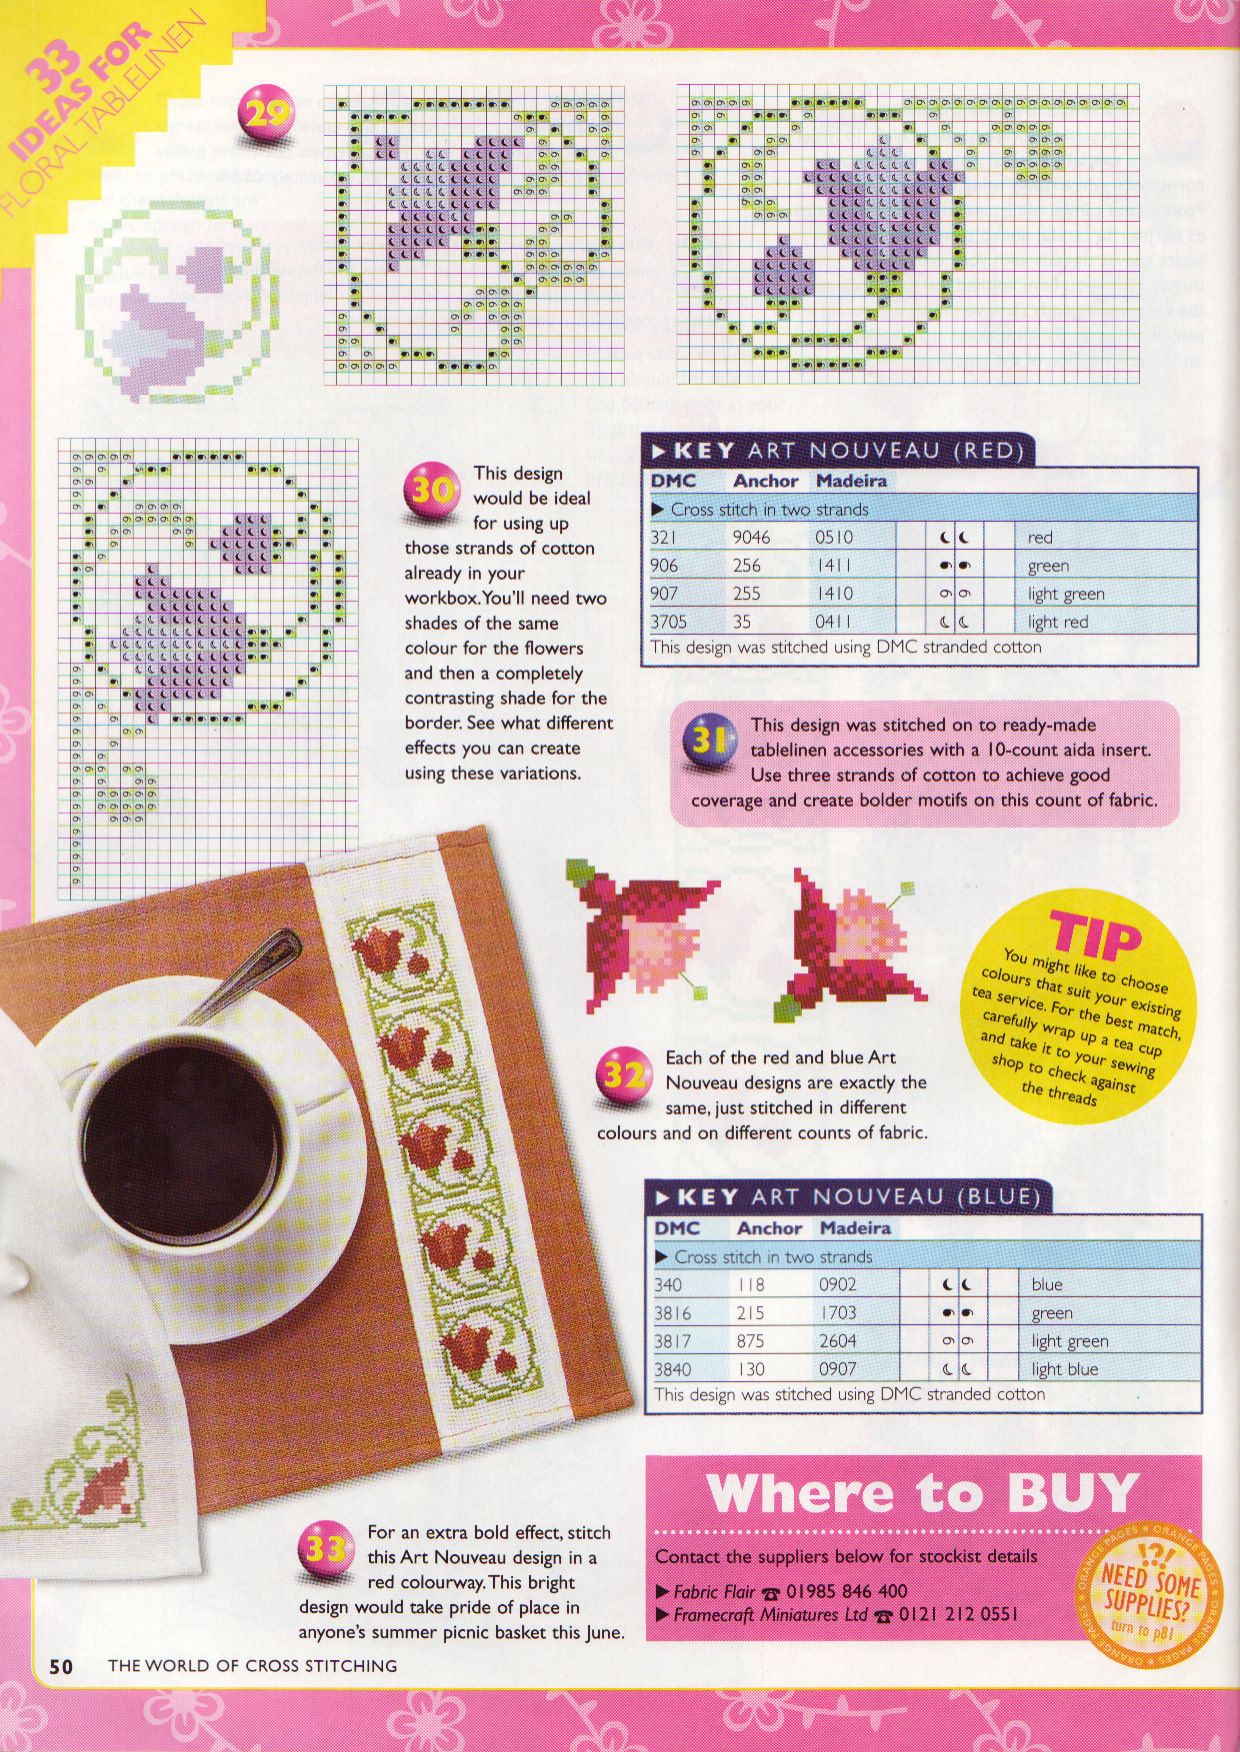 breakfast placemats cross stitch flowers with fuchsia and honeysuckle (7)